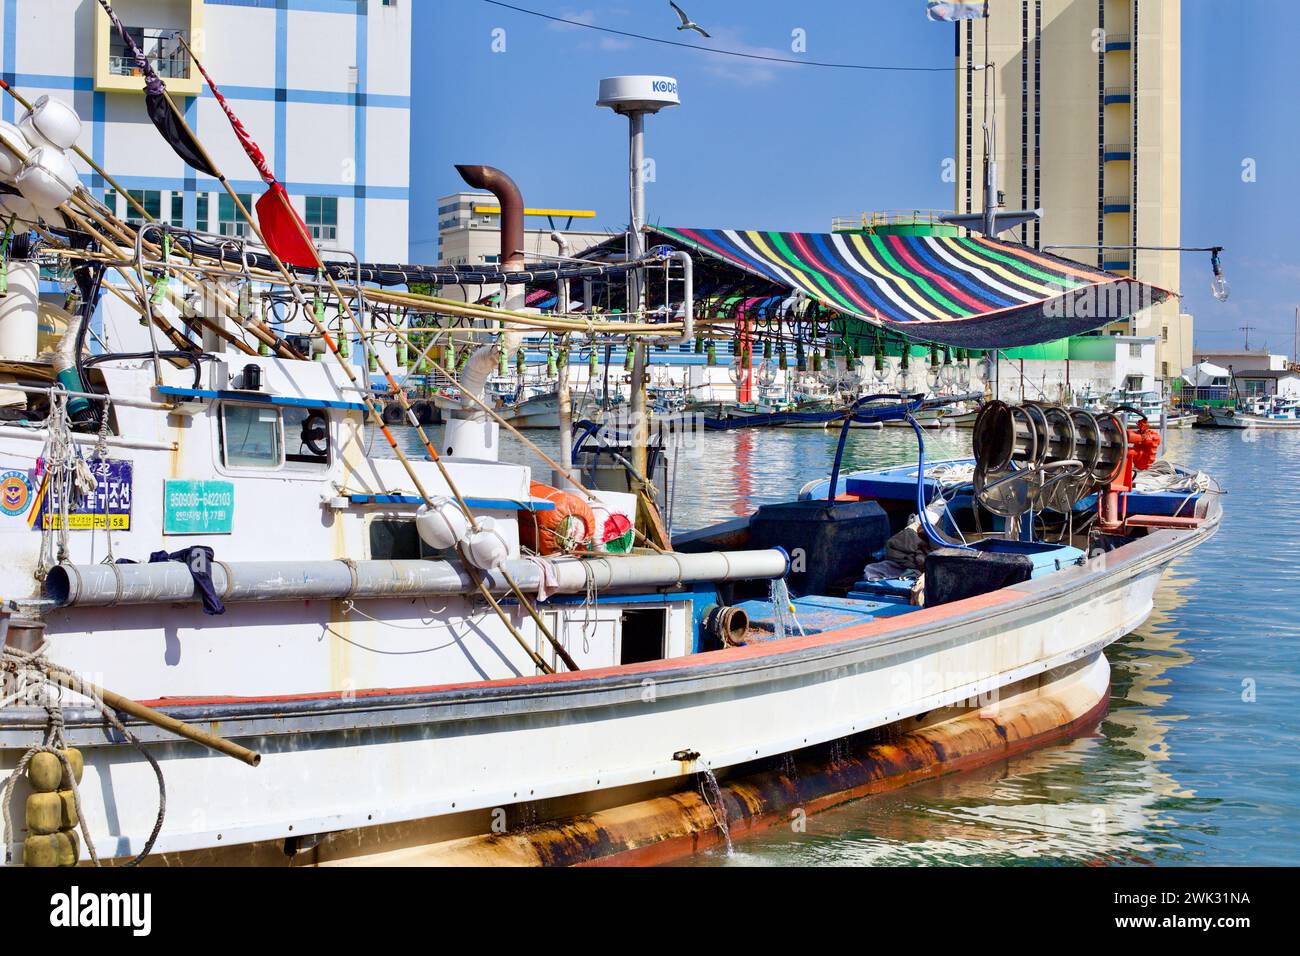 Donghae City, South Korea - July 28th, 2019: A quaint, small squid fishing boat at Mukho Port, decked with large lightbulbs for night fishing, sets a Stock Photo